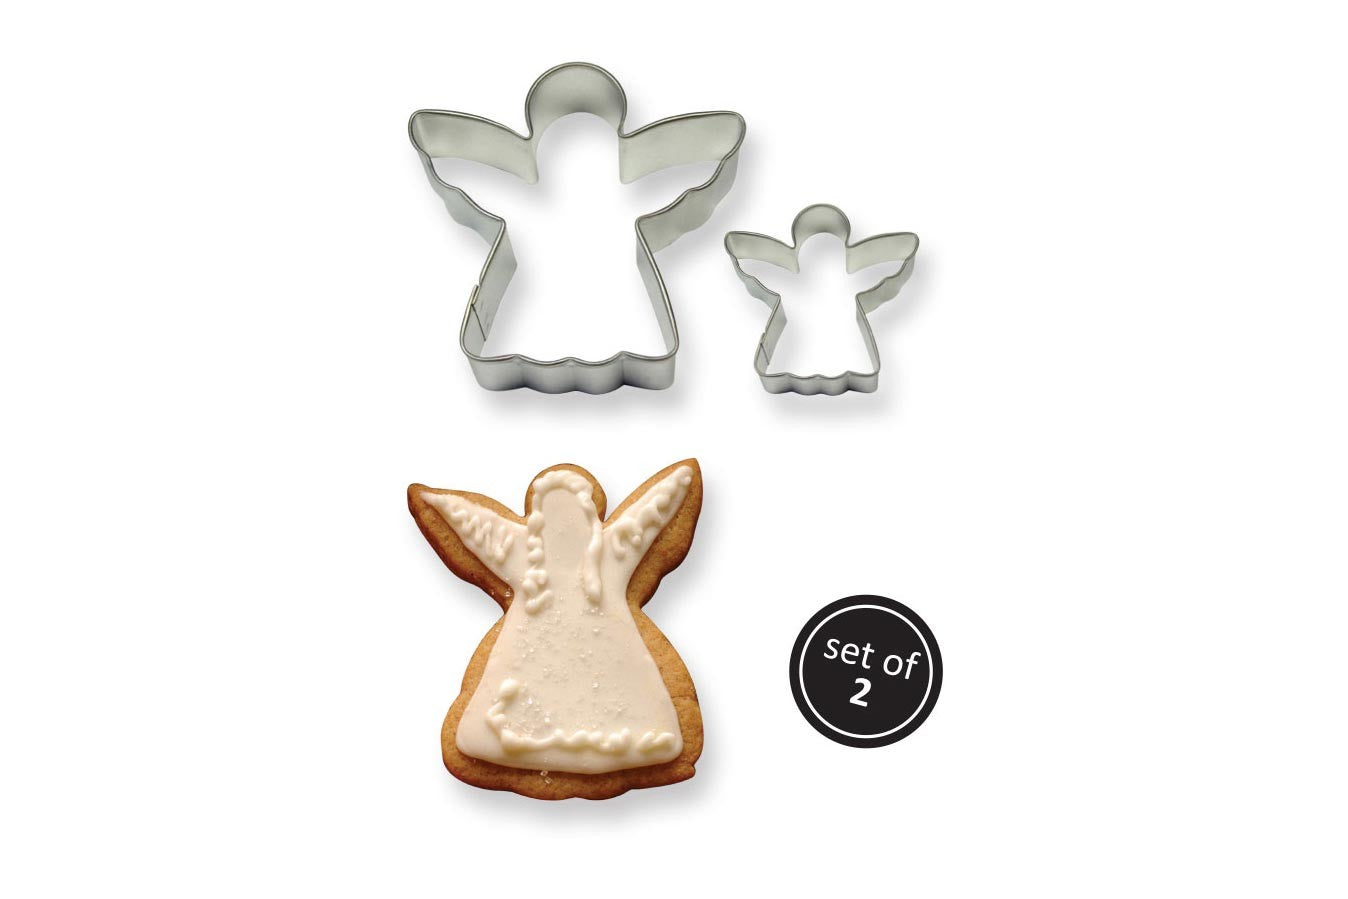 Pme Stainless Steel Angel - Christmas Angel set of 2 Cutters - The Cooks Cupboard Ltd